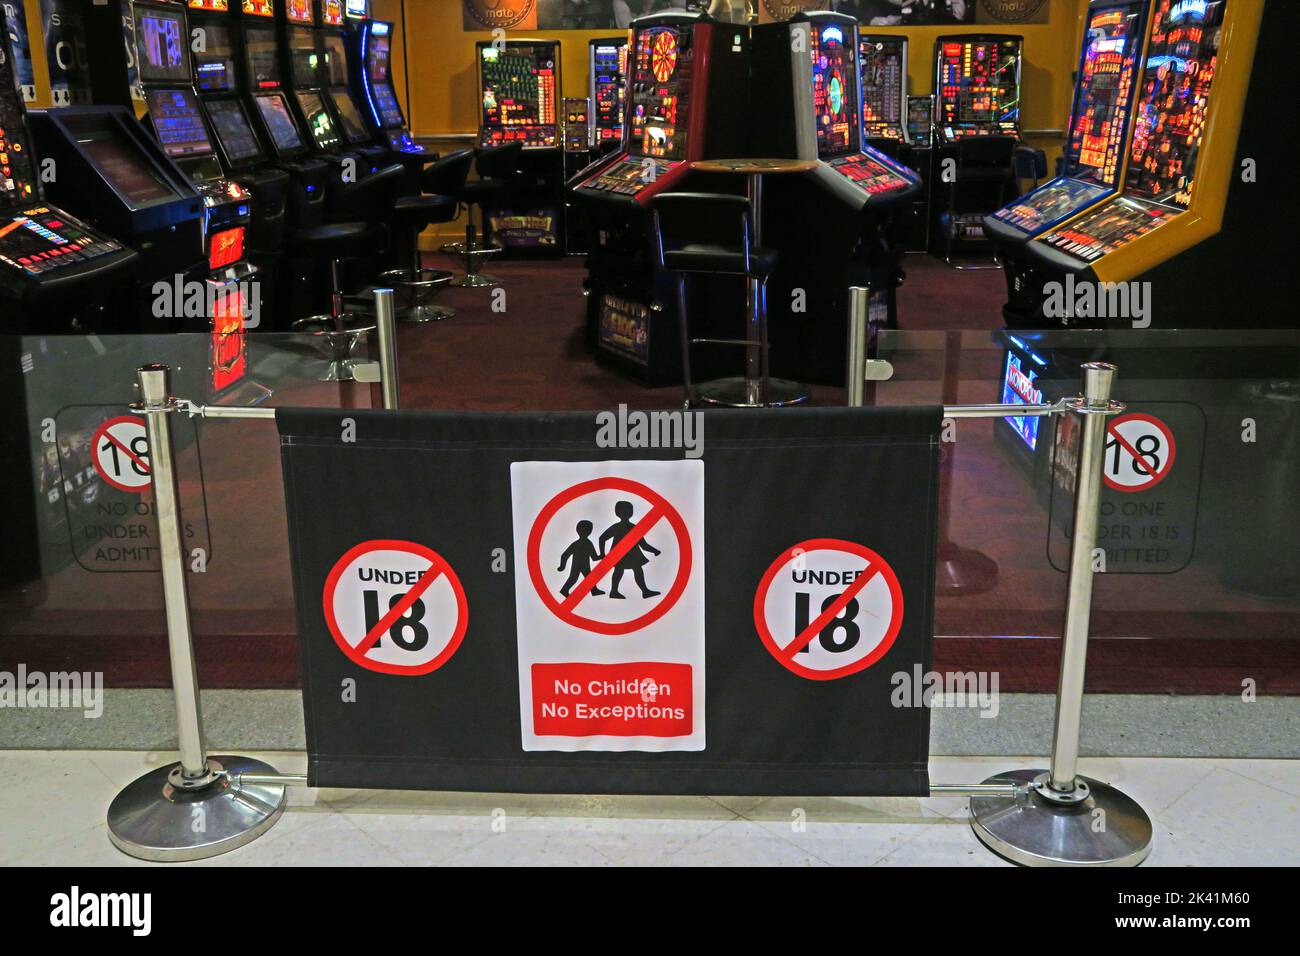 Prize slots No Children No Exceptions sign at motorway services Stock Photo